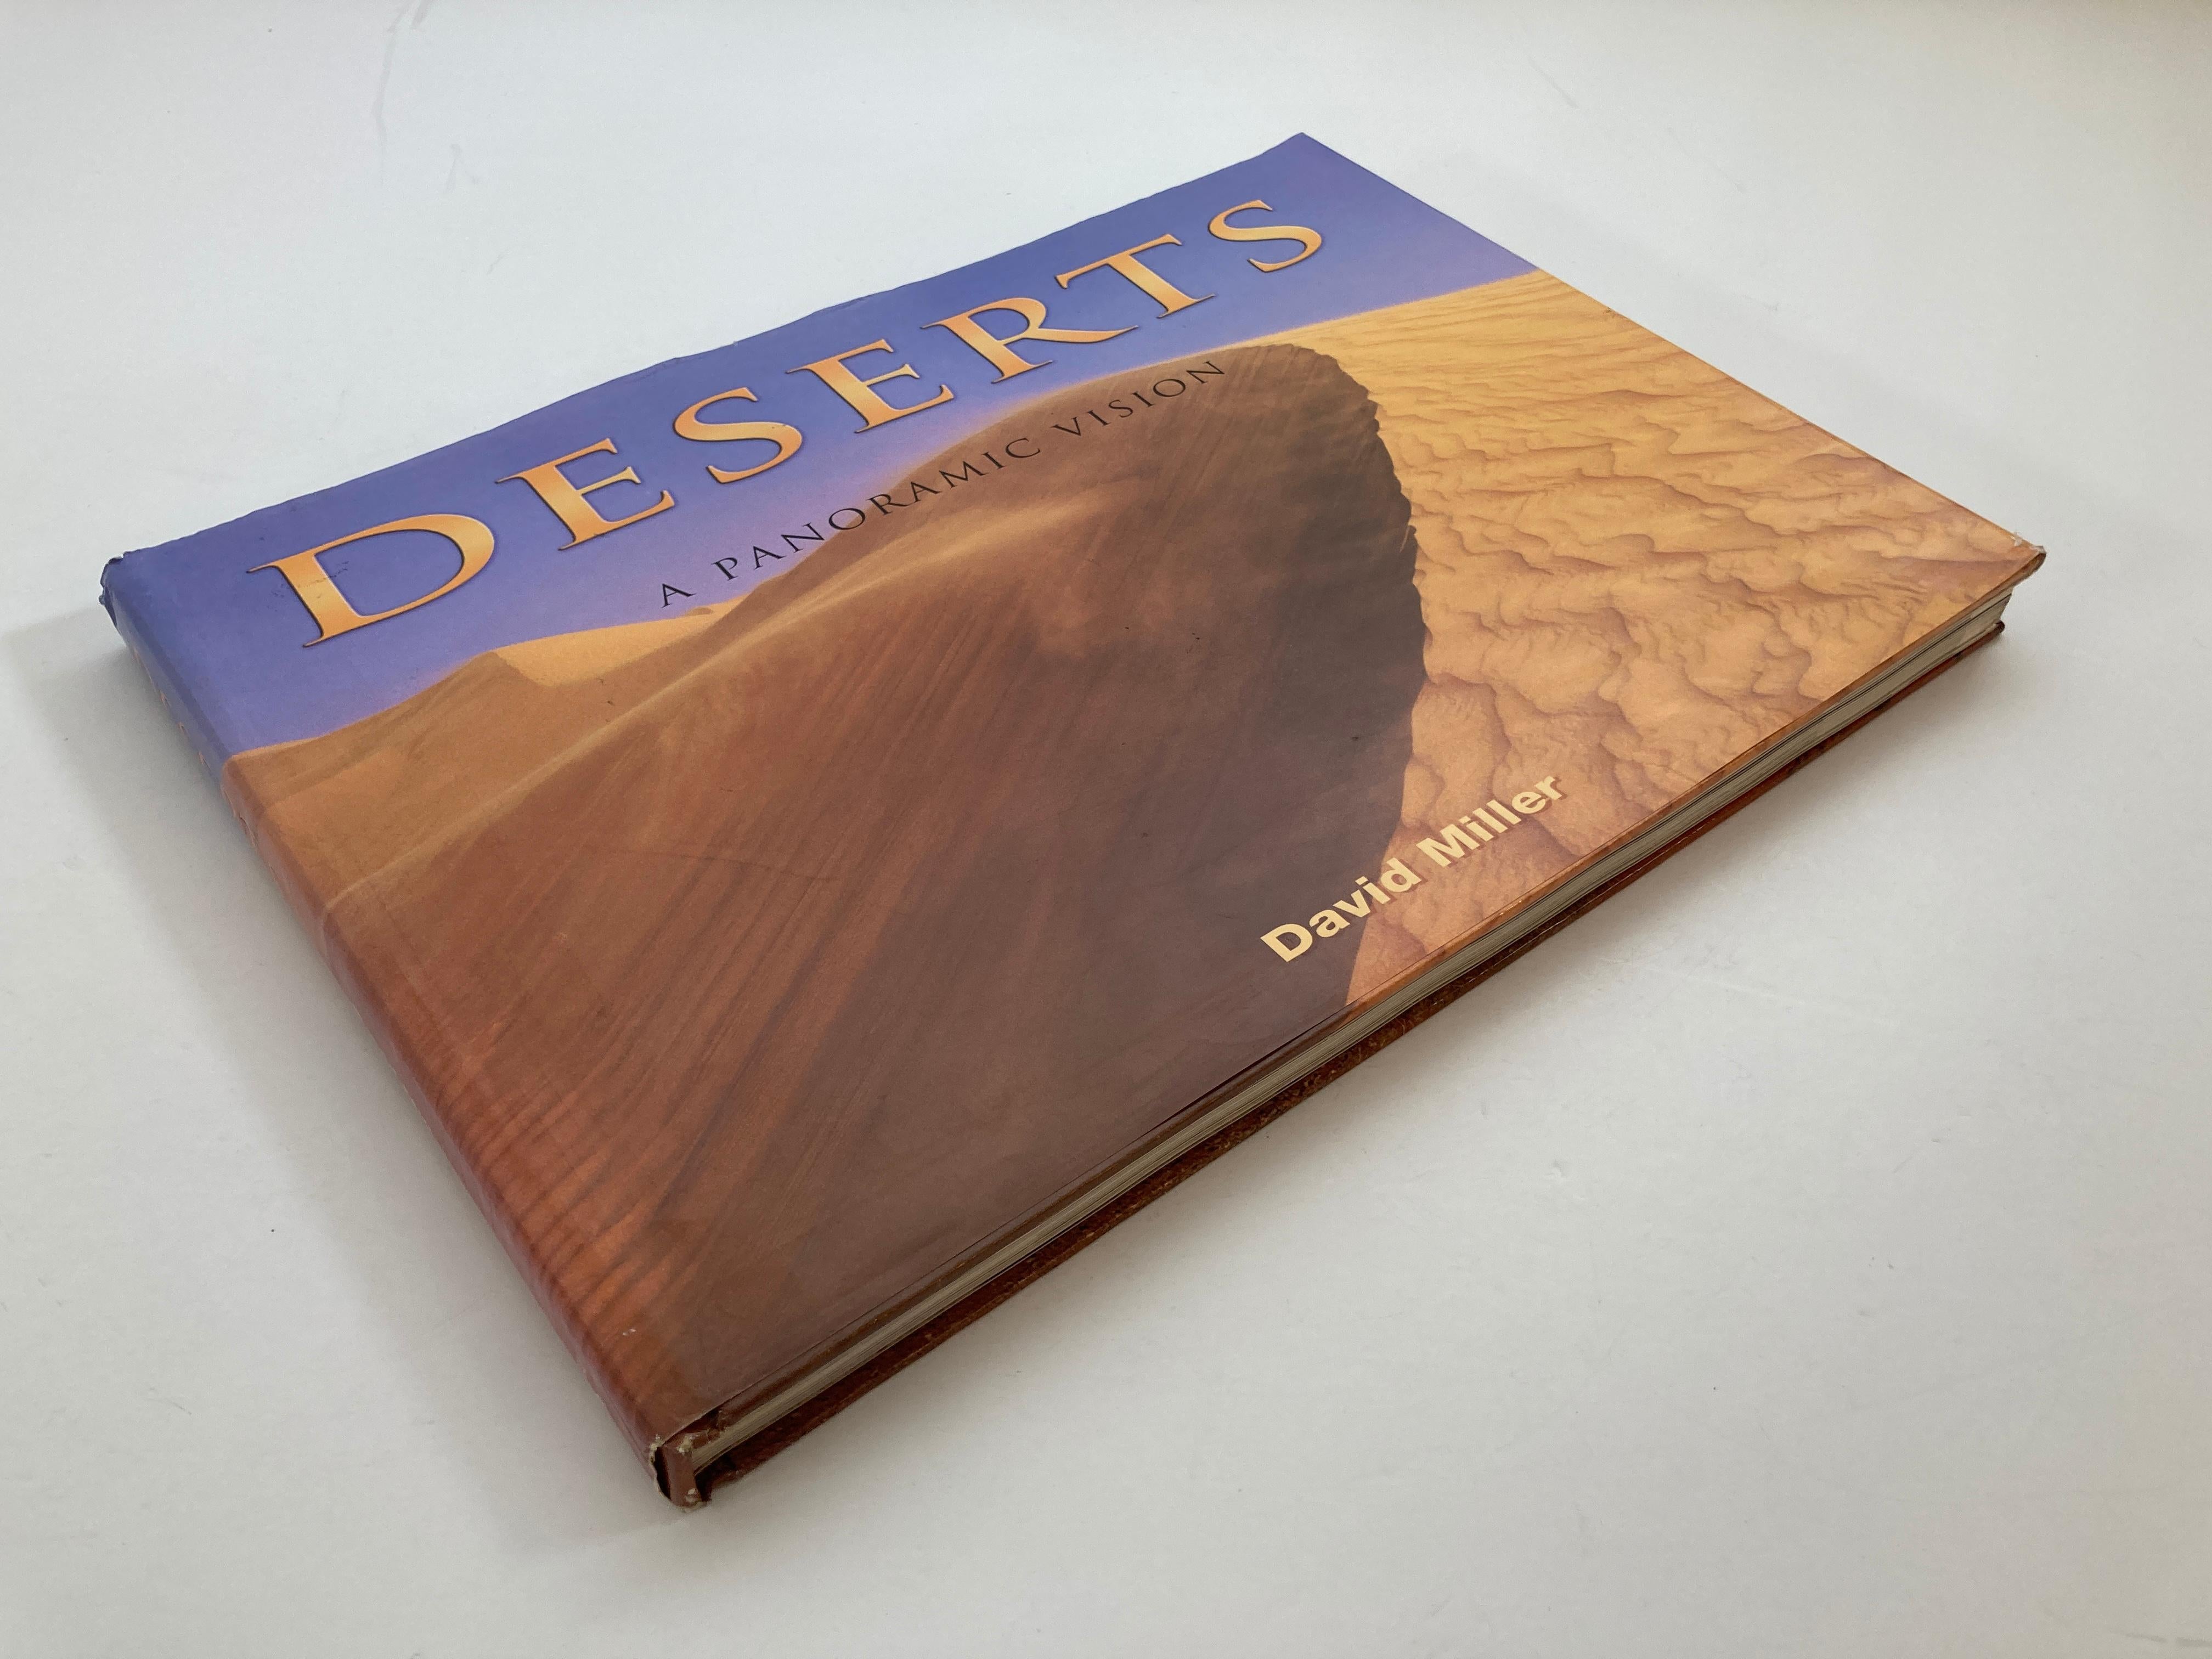 Deserts: A Panoramic Vision by David Miller Large Hardcover Book.
Explore the desert world and discover the beauty that can be found there!
This is a beautiful large library or coffee table book.